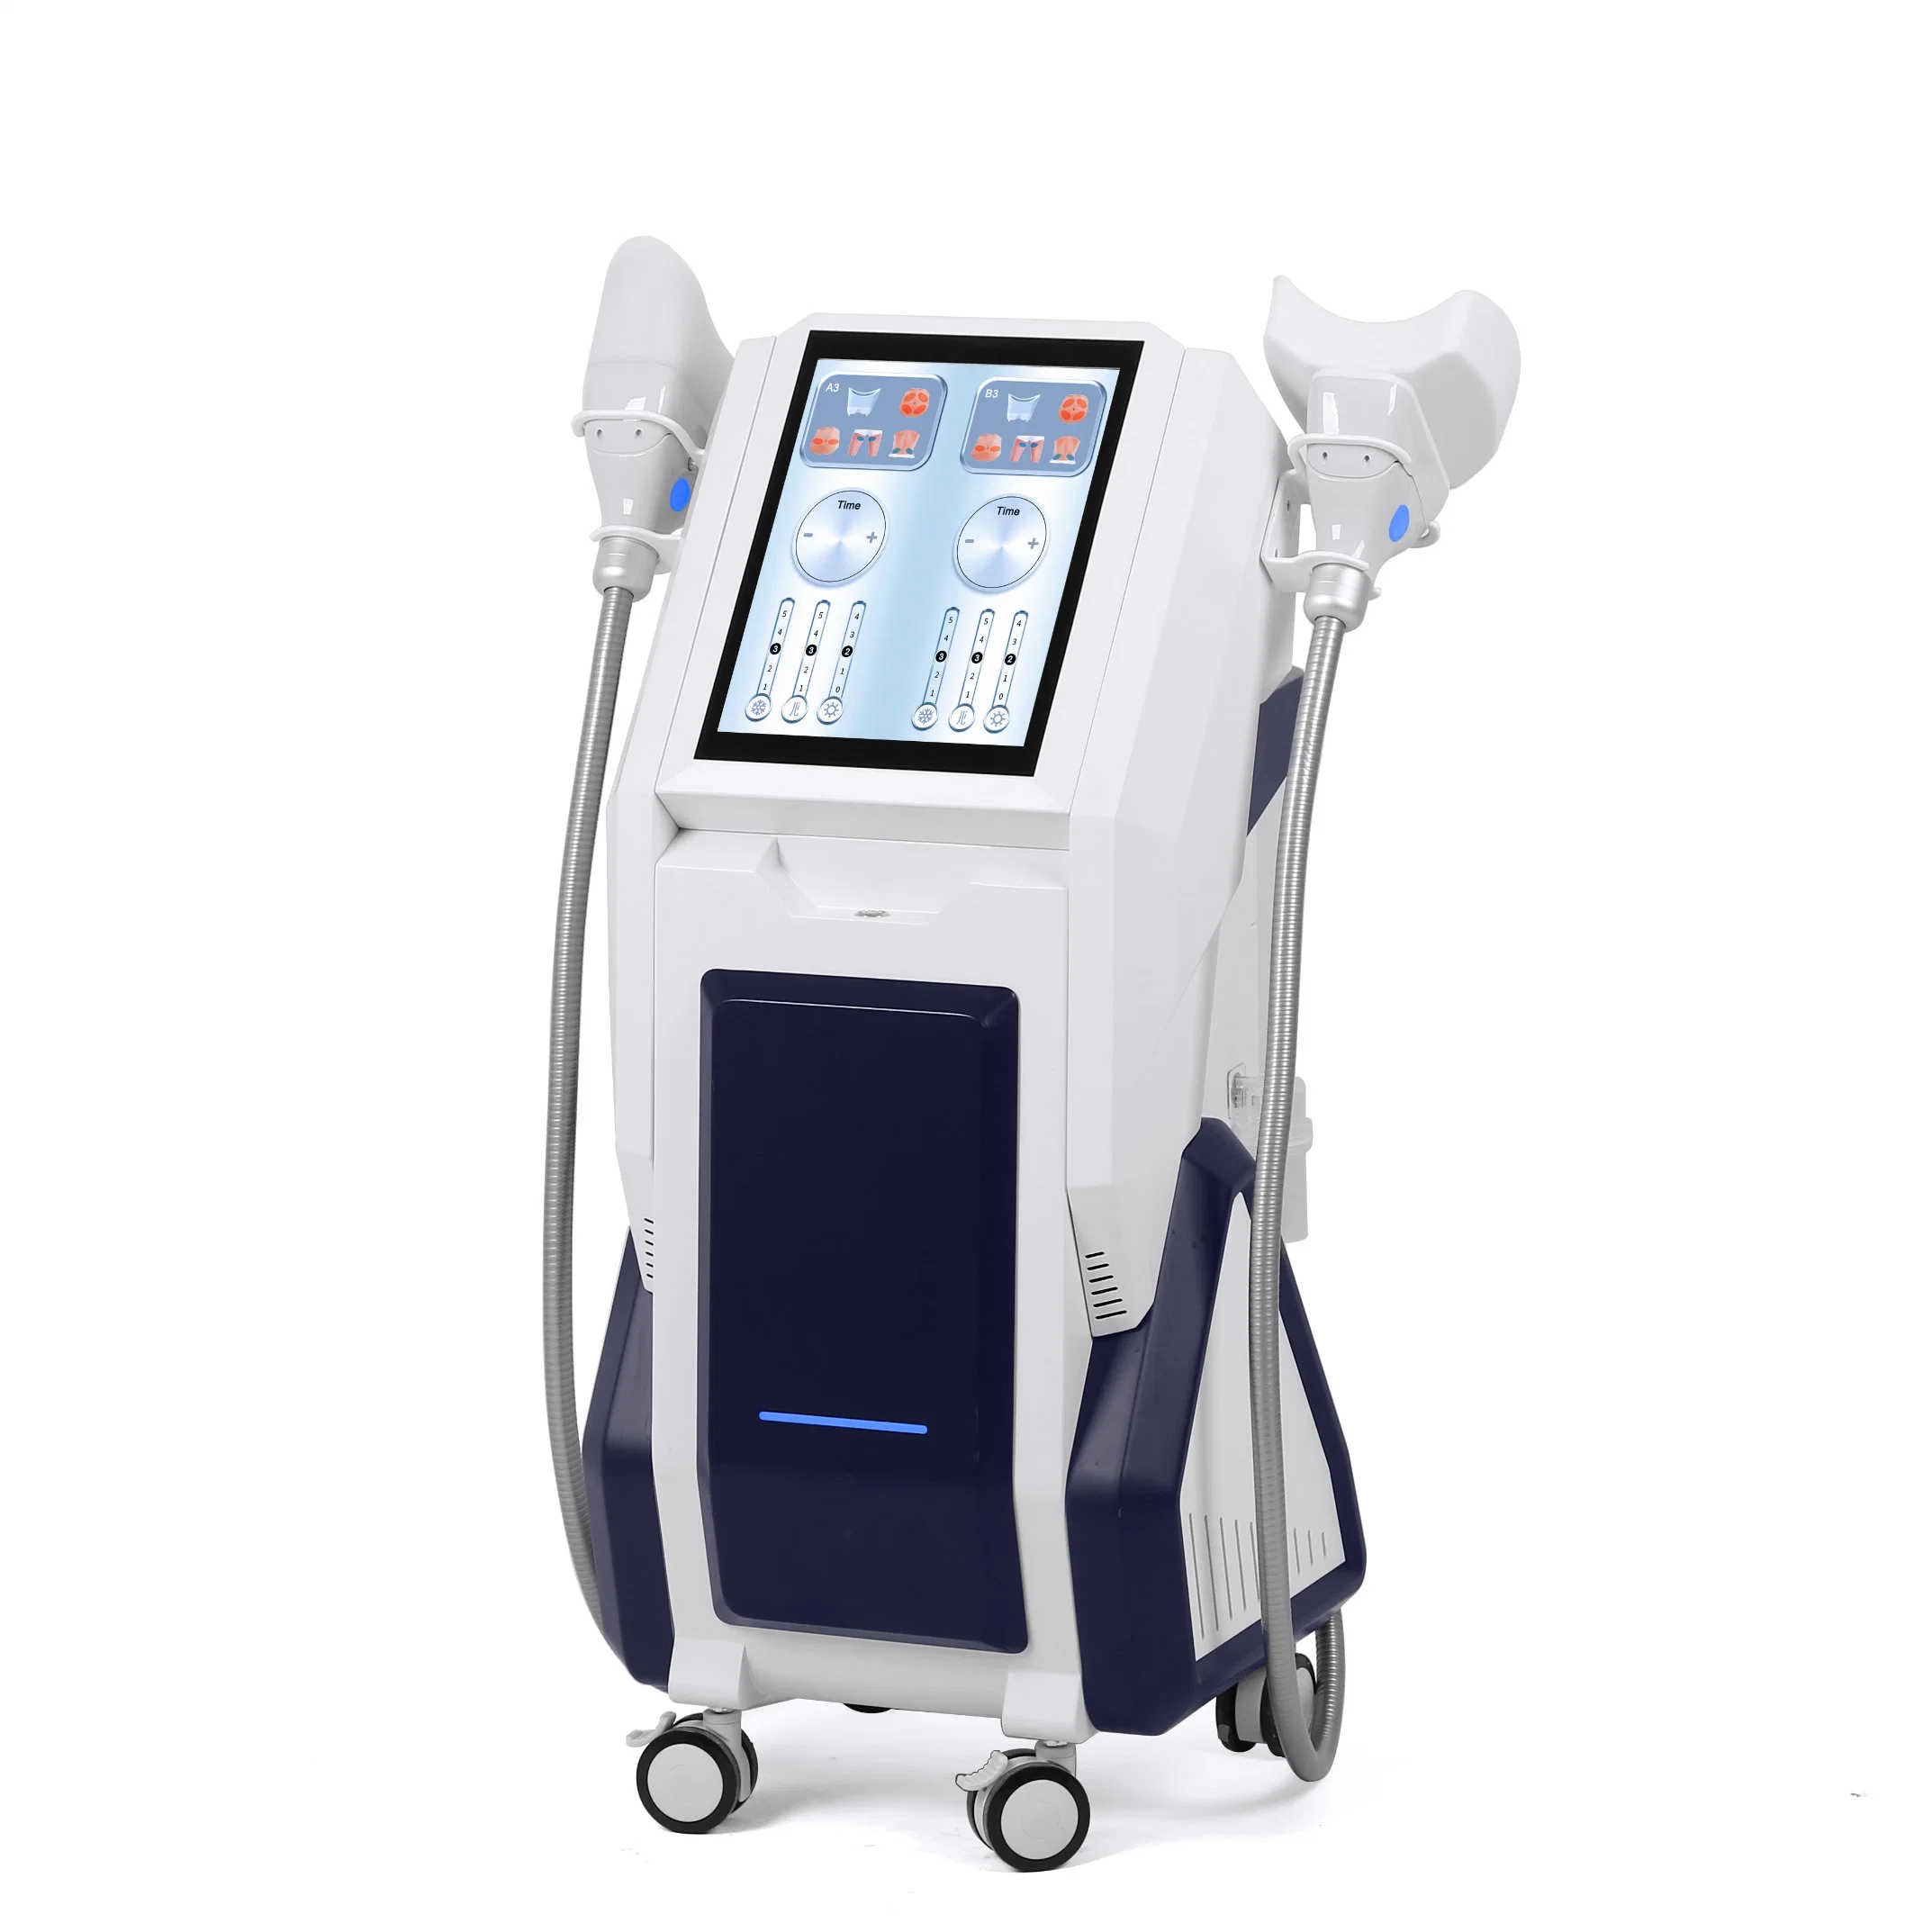 2021 4D Cryo Machine 5 Handles 360 Cooling Slimming Fat Reduction Non-Invasive Low Pain Beauty Equipment Price